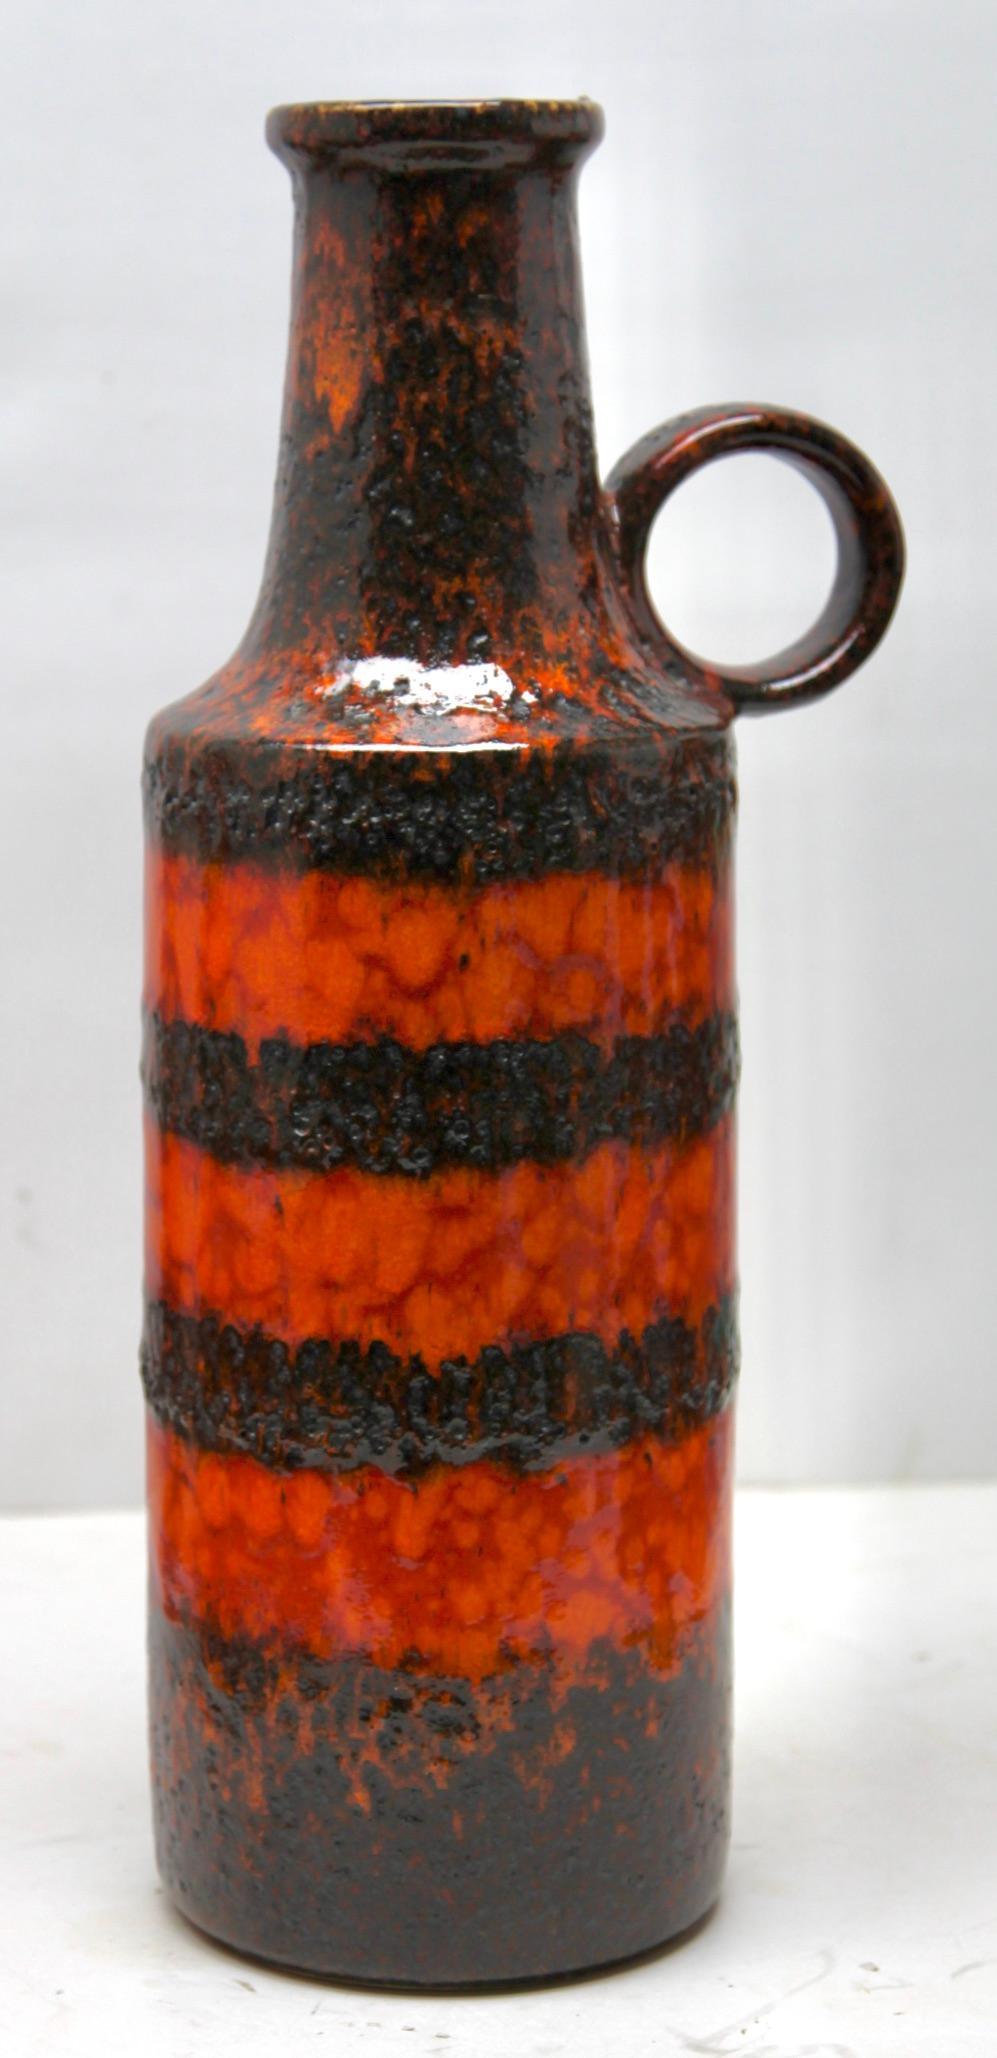 A classic 60s design. Of Fat lava handled vase in the classic sixties 'Sundown' decor; with a rough glaze of dark earth-colour over the yellow and red. 
From the Scheurich (Europ Linie) W-Germany. 
Hand decorated glaze.

Measure: 47 x 19 cm